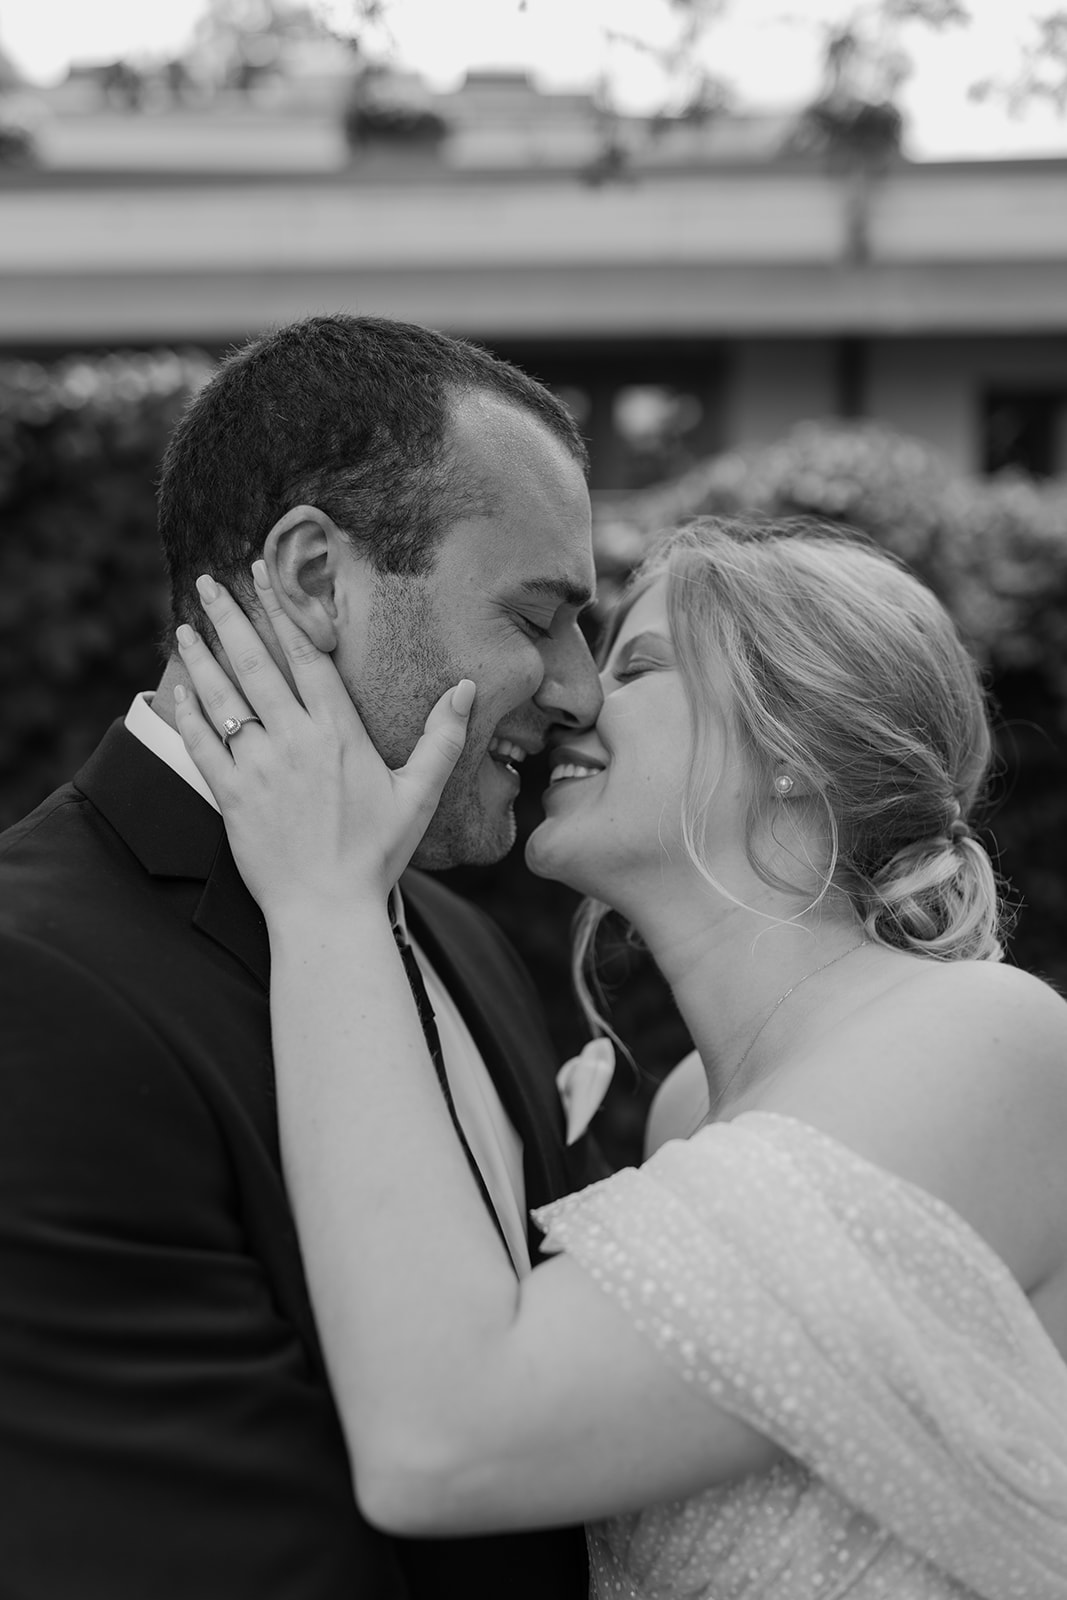 Bride holds her groom's face as she kisses him